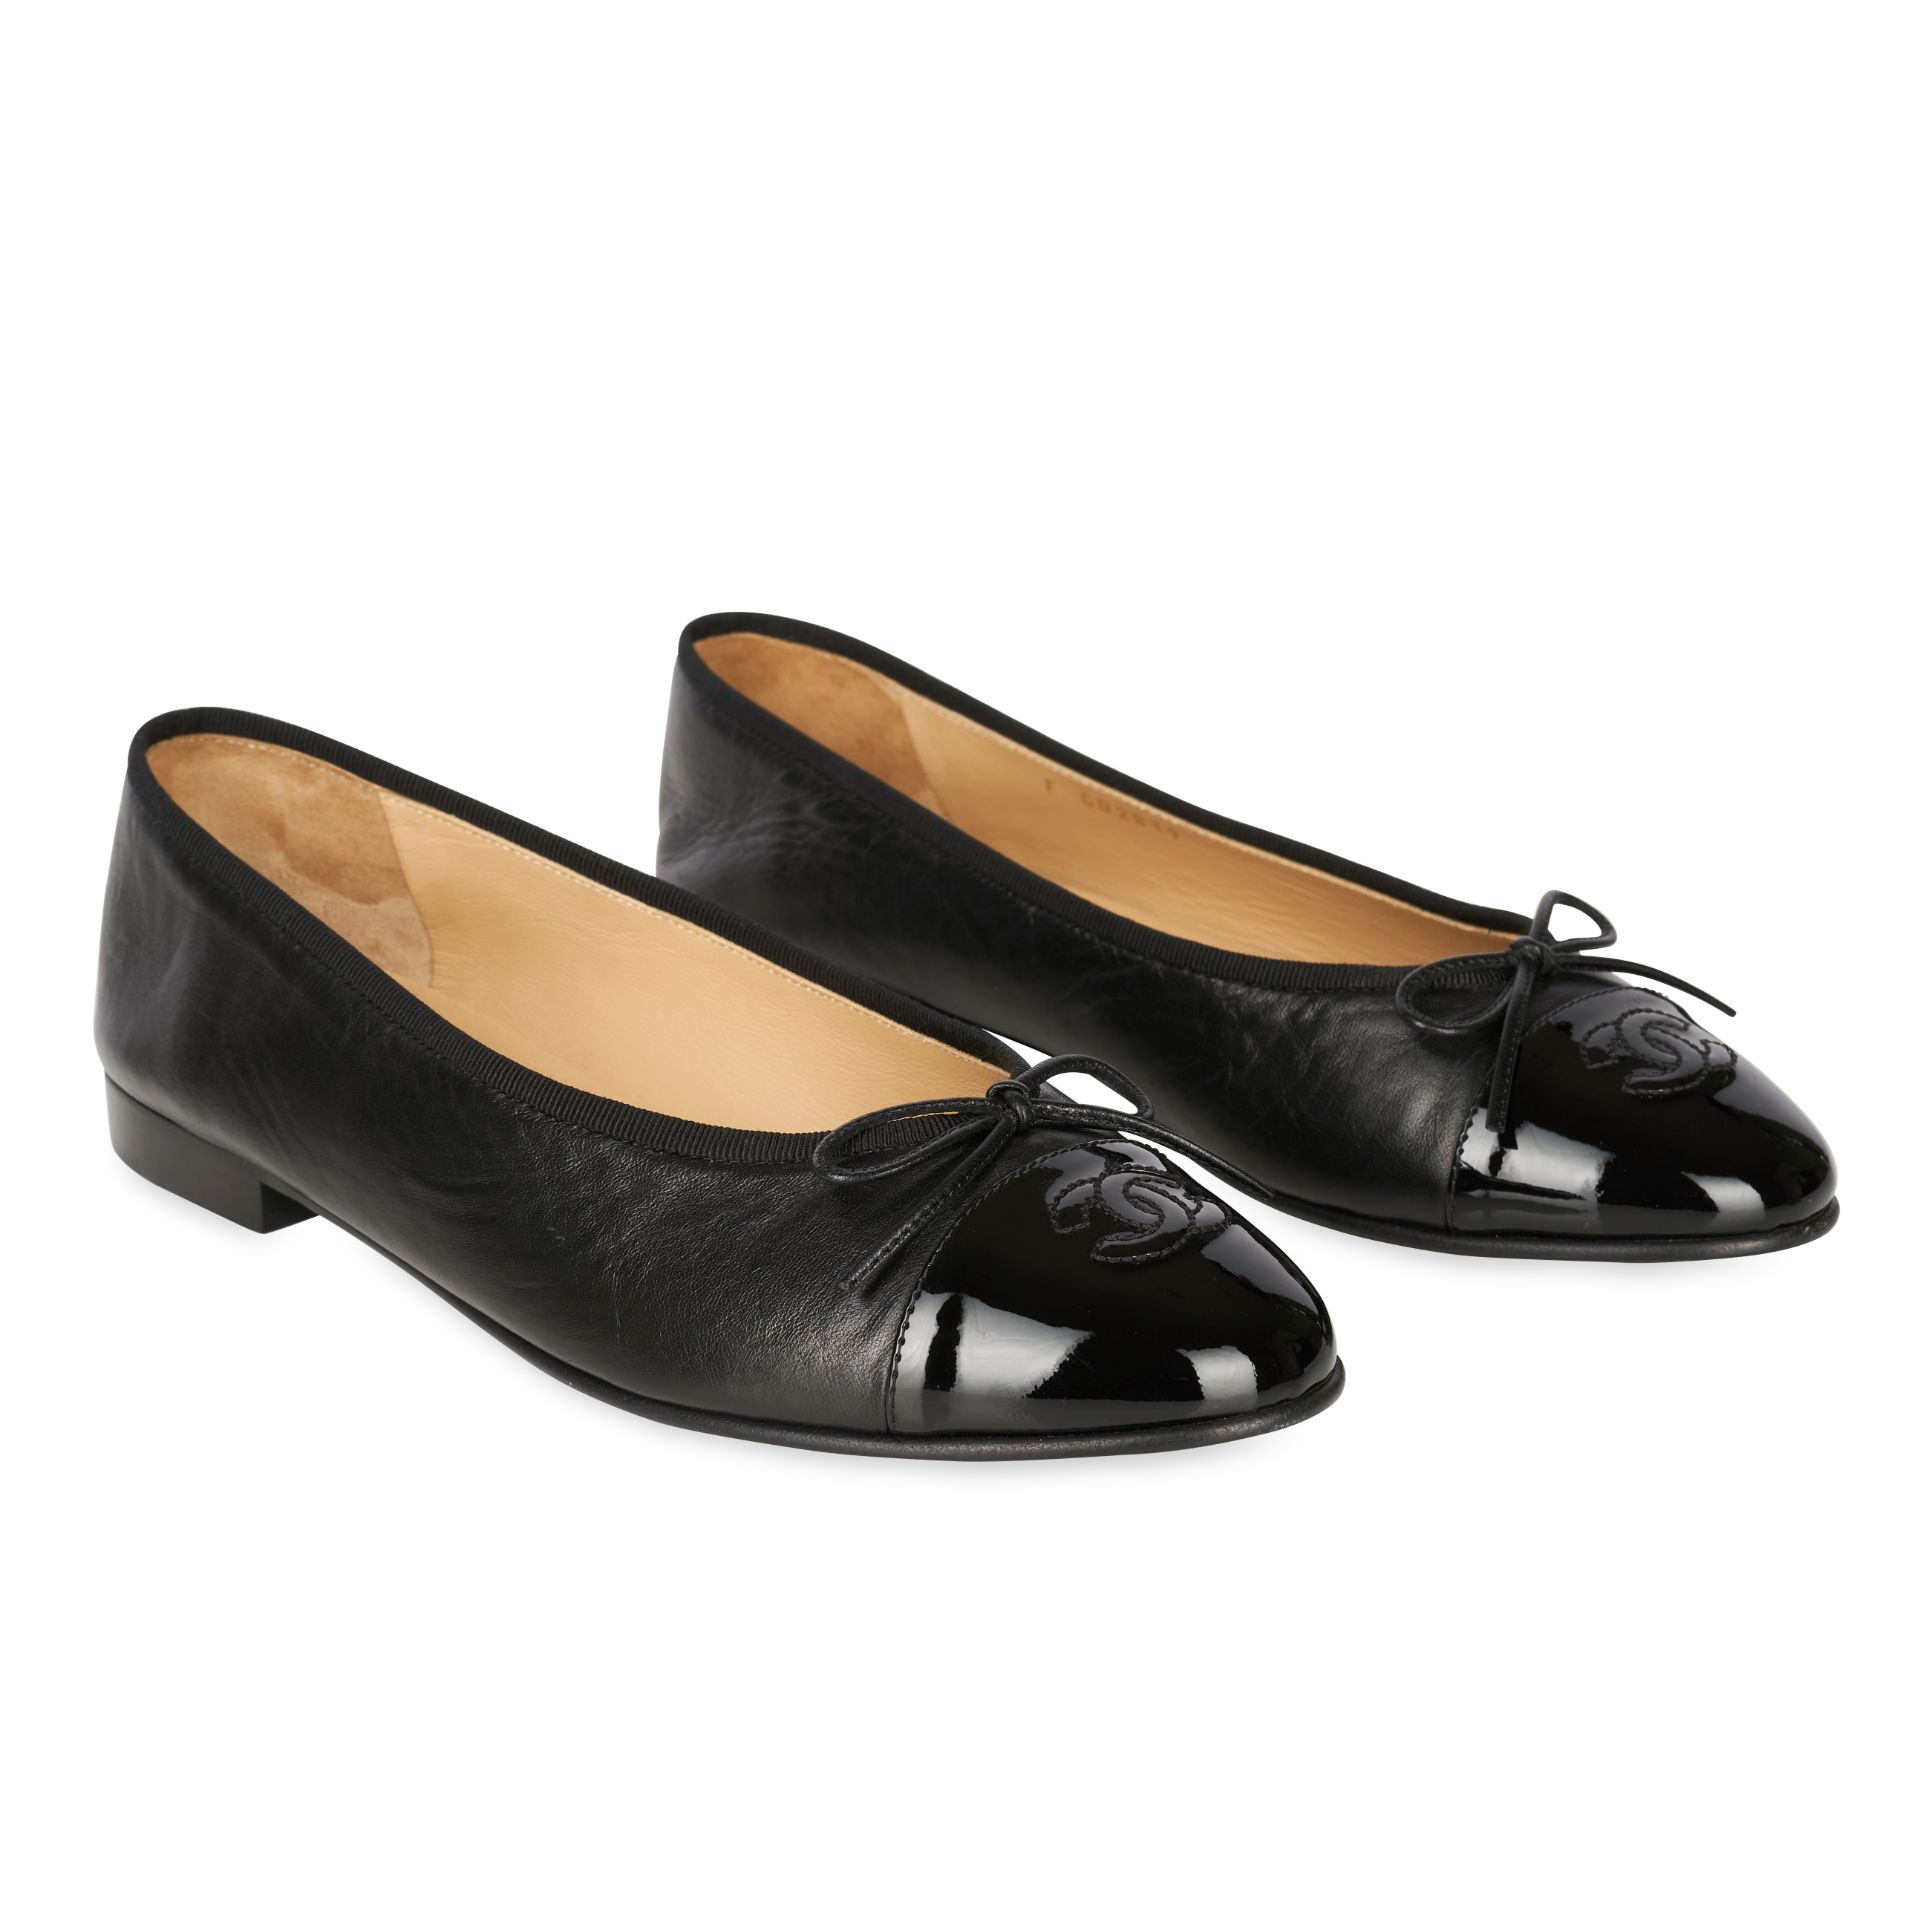 CHANEL BLACK BALLERINA FLATS  Condition grade A-.  Size 39.5. Black leather ballerinas with pat...